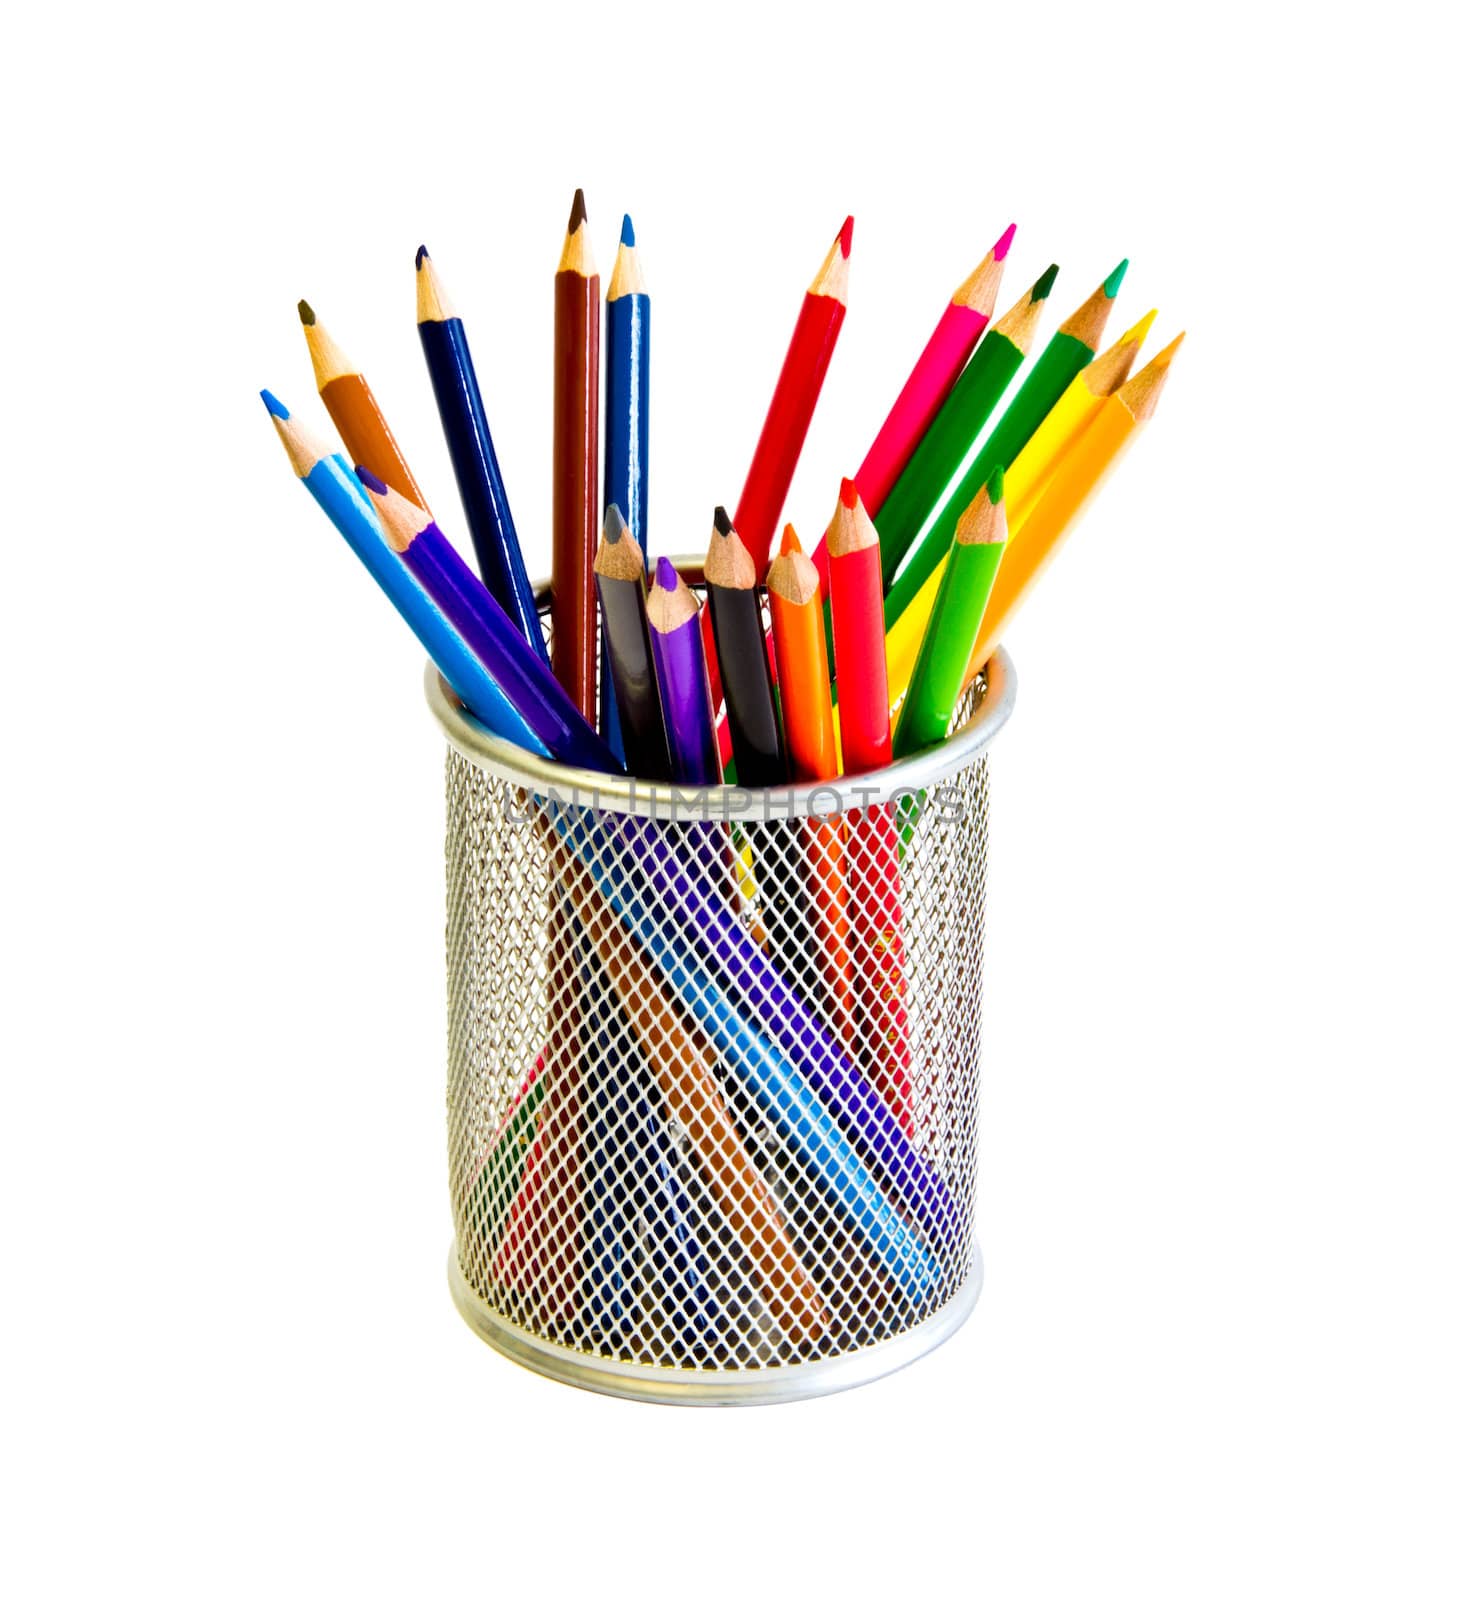 color pencils by marco_govel